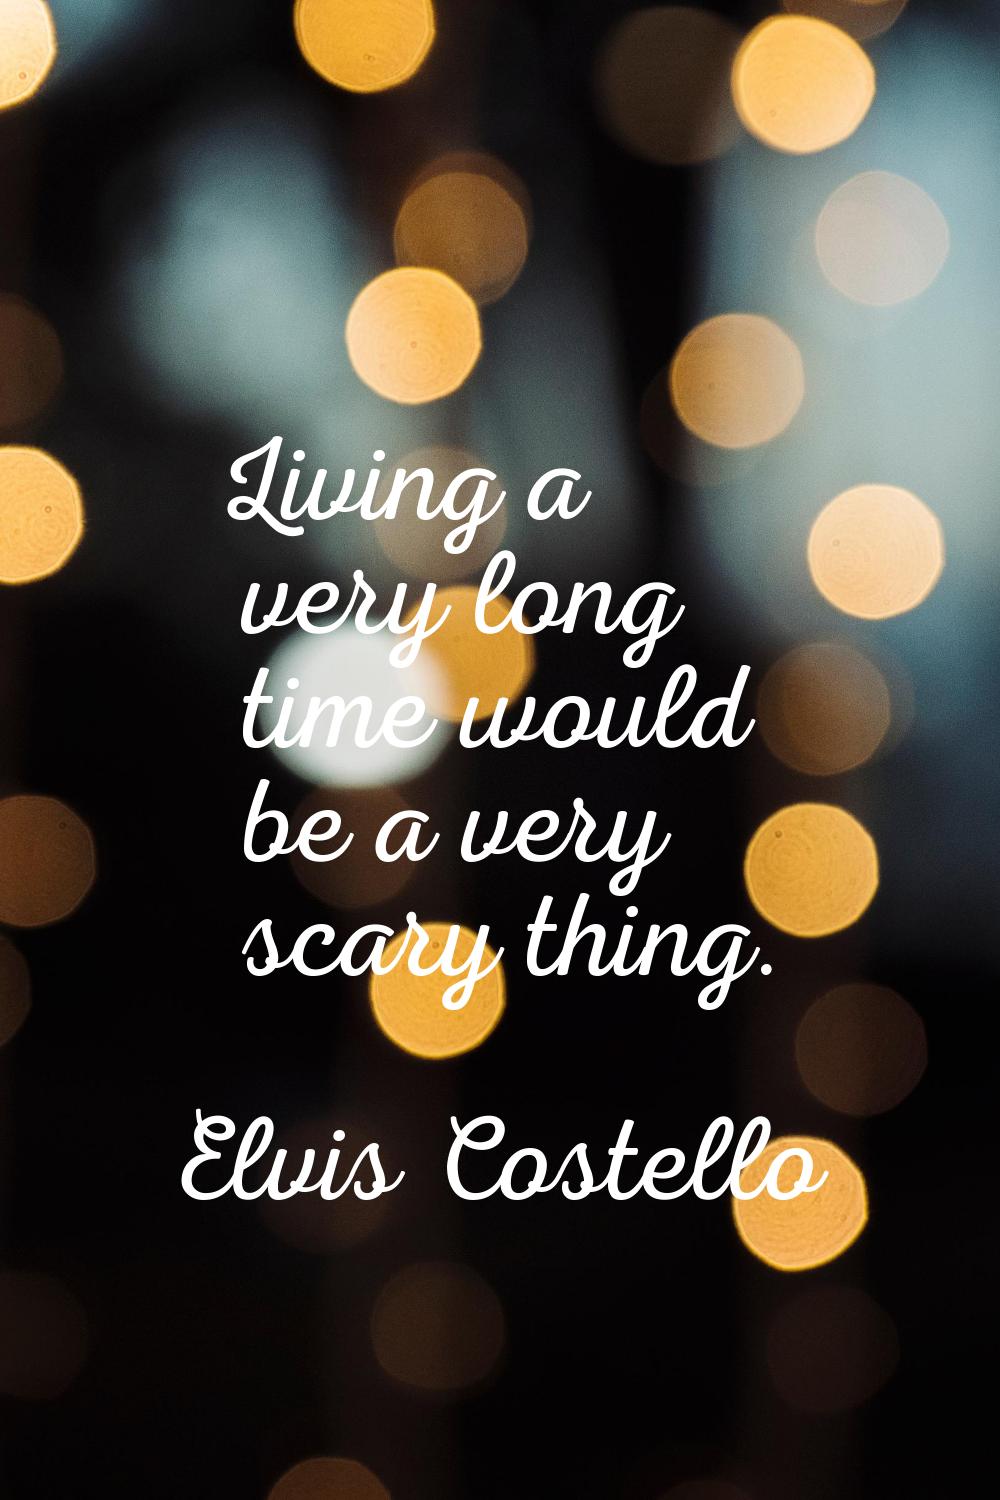 Living a very long time would be a very scary thing.